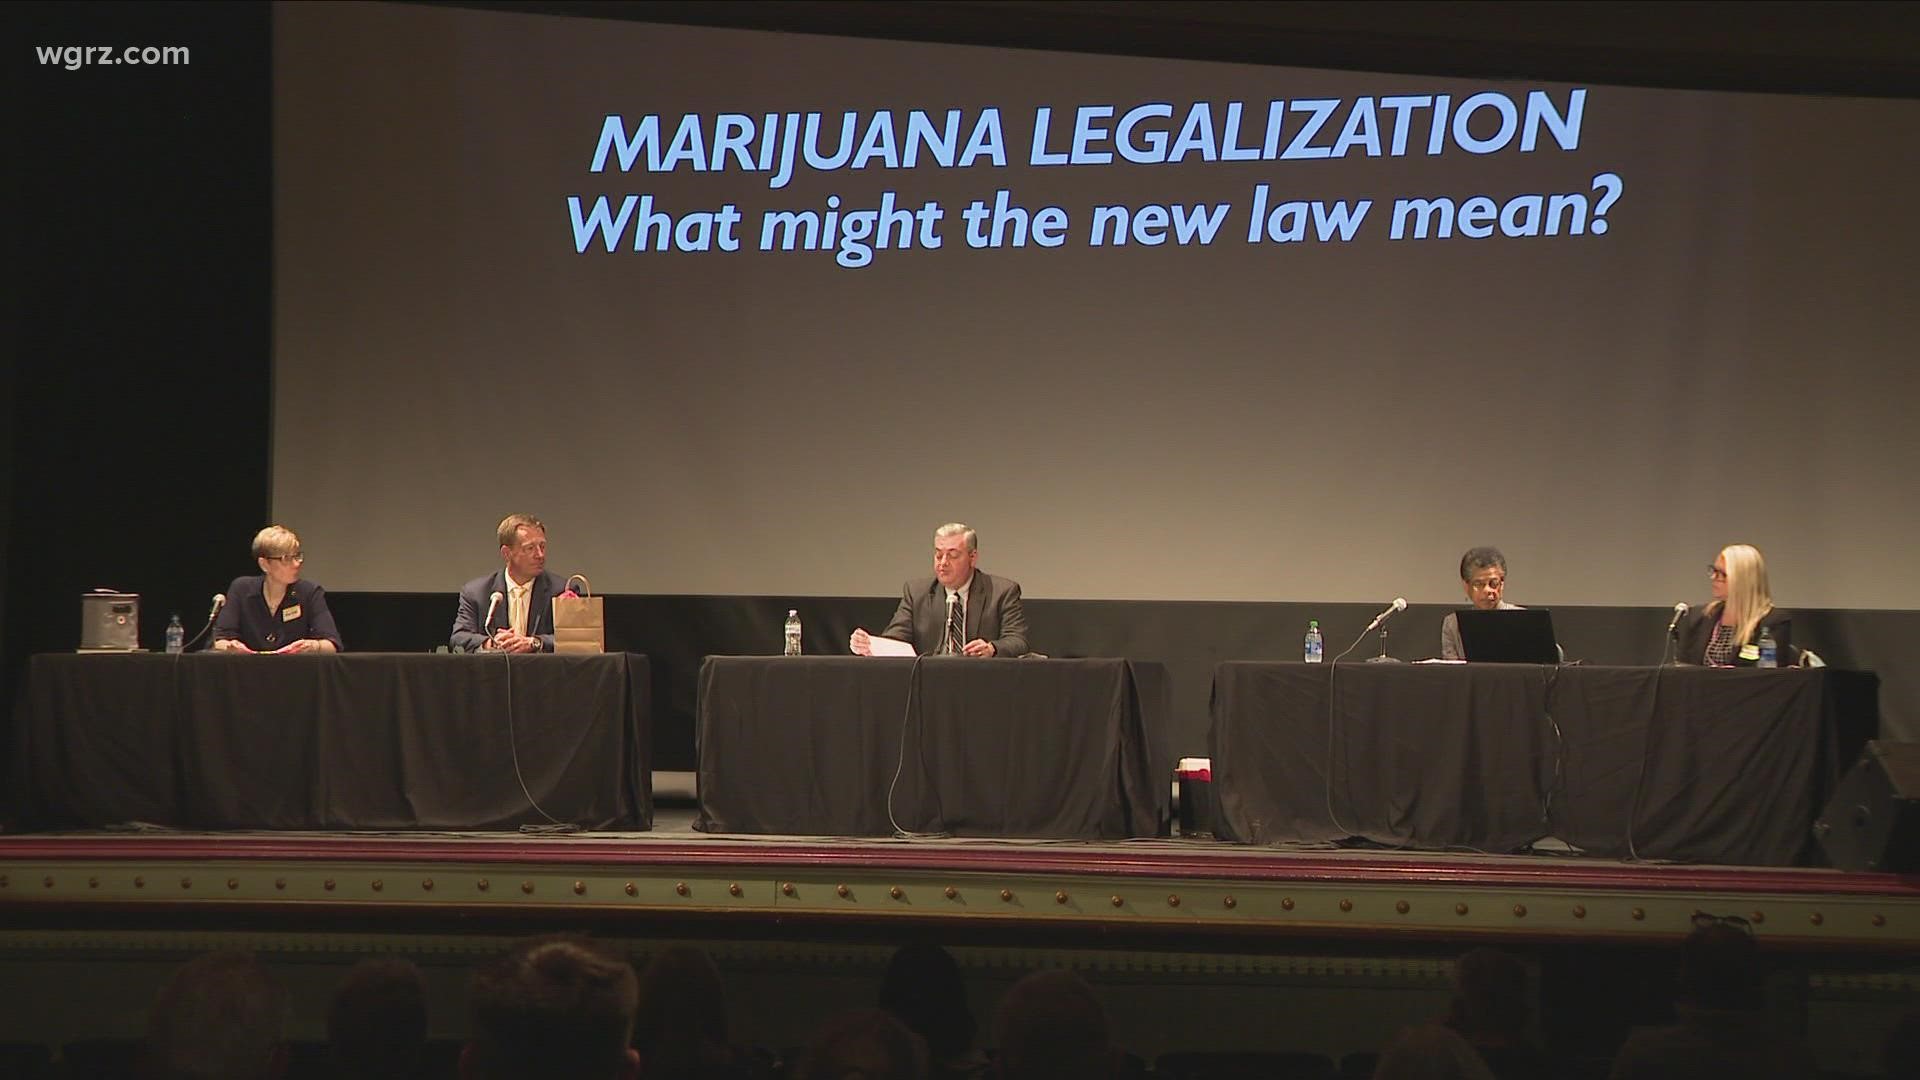 The five-member panel answered questions about the new law and what it will mean for the village. It was an informational session and encouraged collaboration.